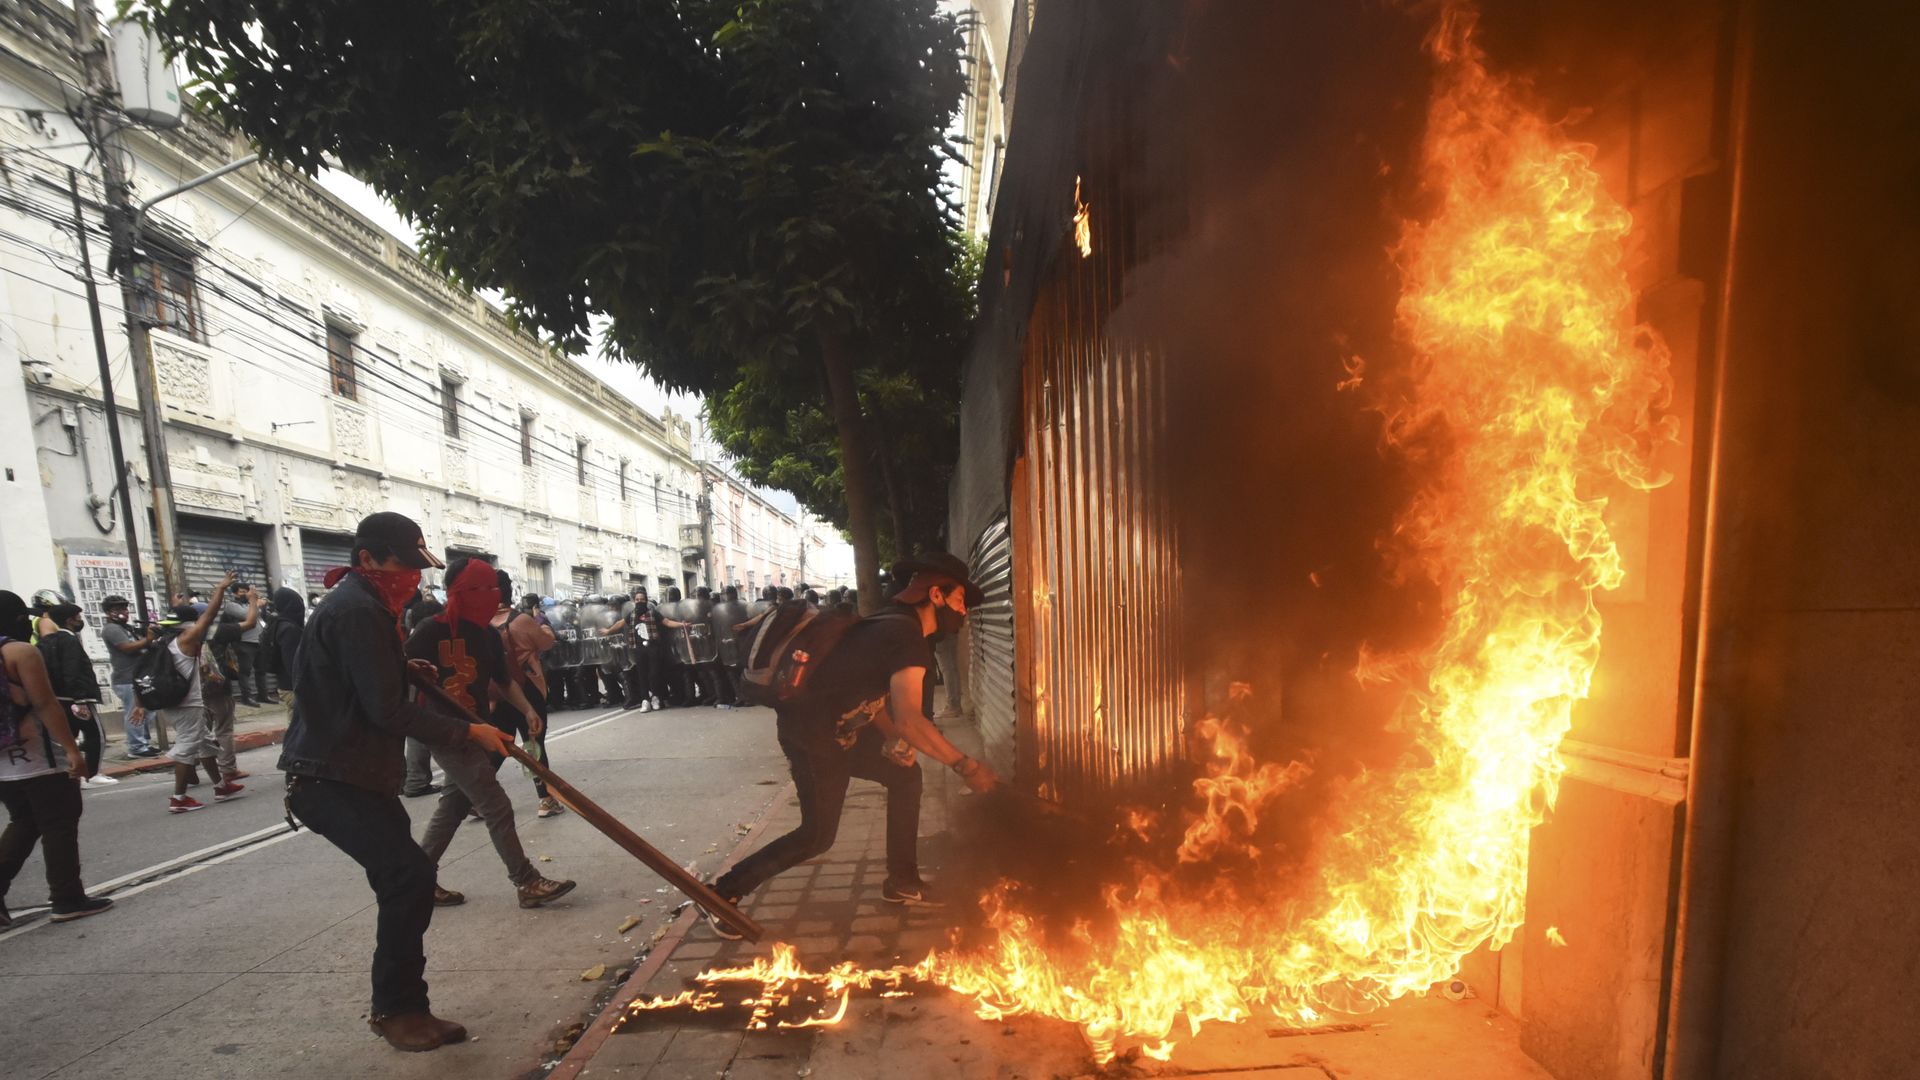 Demonstrators set on fire part of the Congress building during a protest demanding the resignation of Guatemalan President Alejandro Giammattei, in Guatemala City on November 21